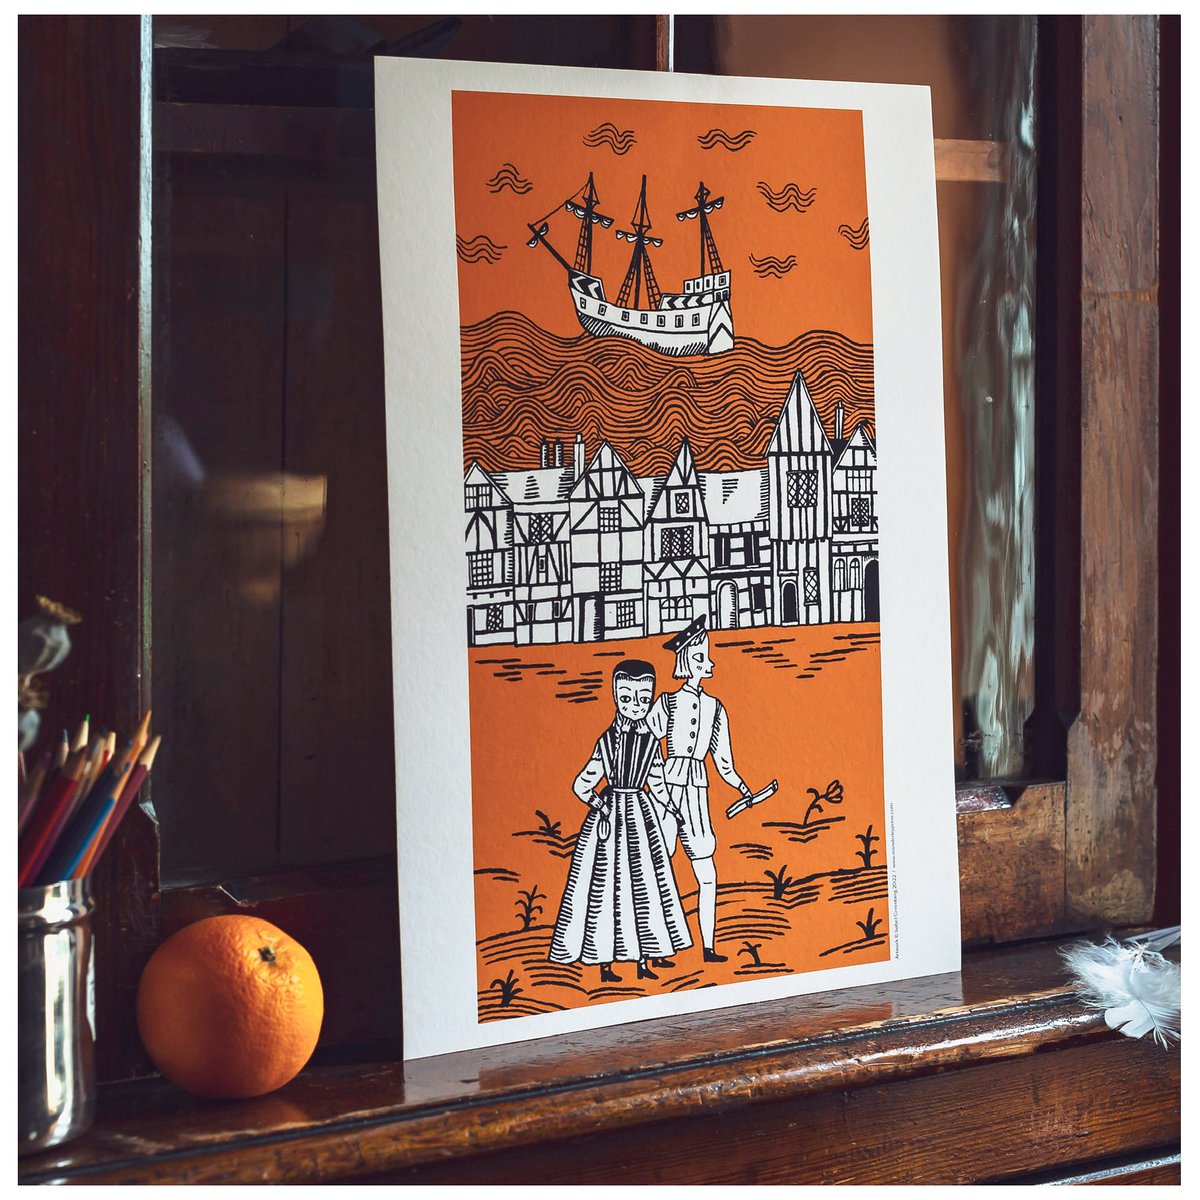 Take one classic kids book, add a beautiful illustration by @isabelgreenberg + stir in a smidge of high-quality printing + thick dappled card. The result? A stunning art print of the front cover of The Armourer's House by @rsutcliff #rosemarysutcliff bit.ly/3h4wRoW